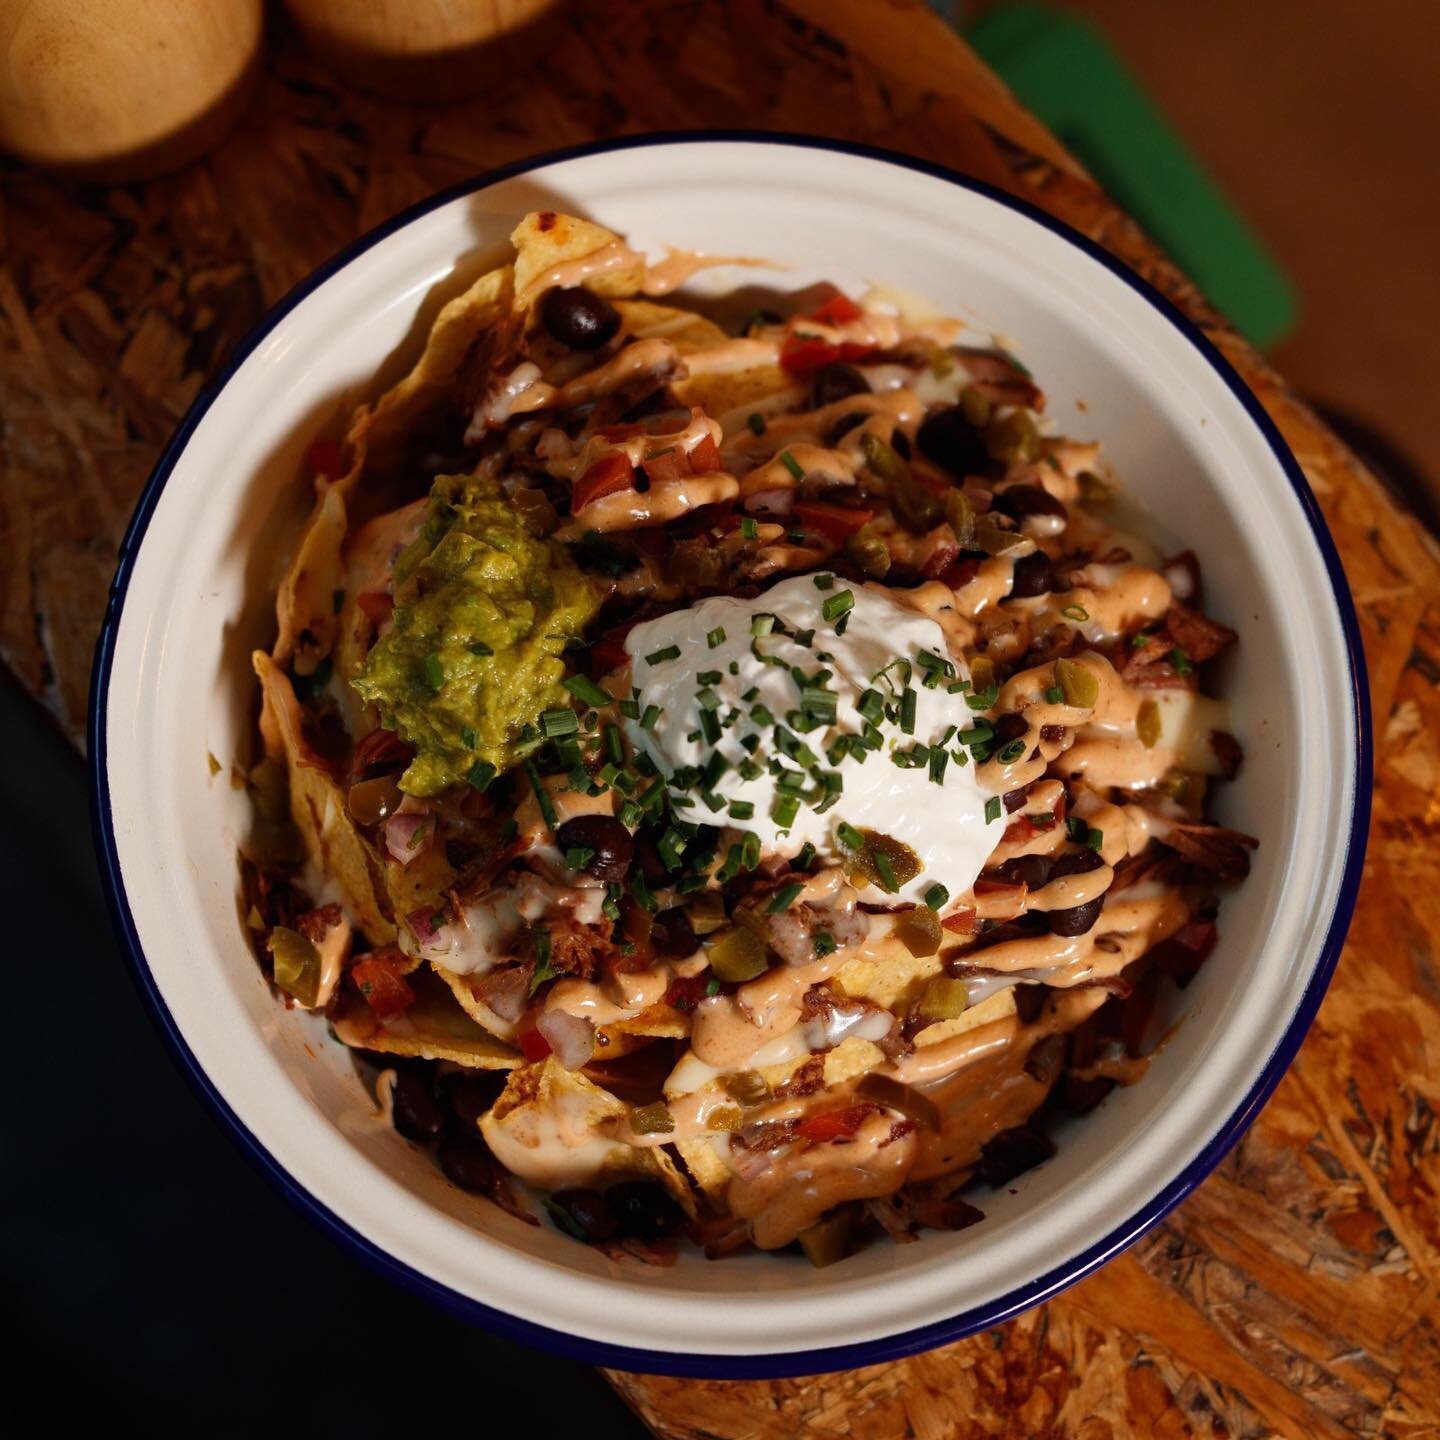 Big, bold, and loaded with toppings: New York-style nachos are not for the faint of heart!

Perfect for sharing with friends or enjoying on your own 😍❤️

.

.

.

.

#Nachos #NYCNachos #LoadedNachos #Nachoslovers #StreetFood #FoodLovers #Brisbane #B